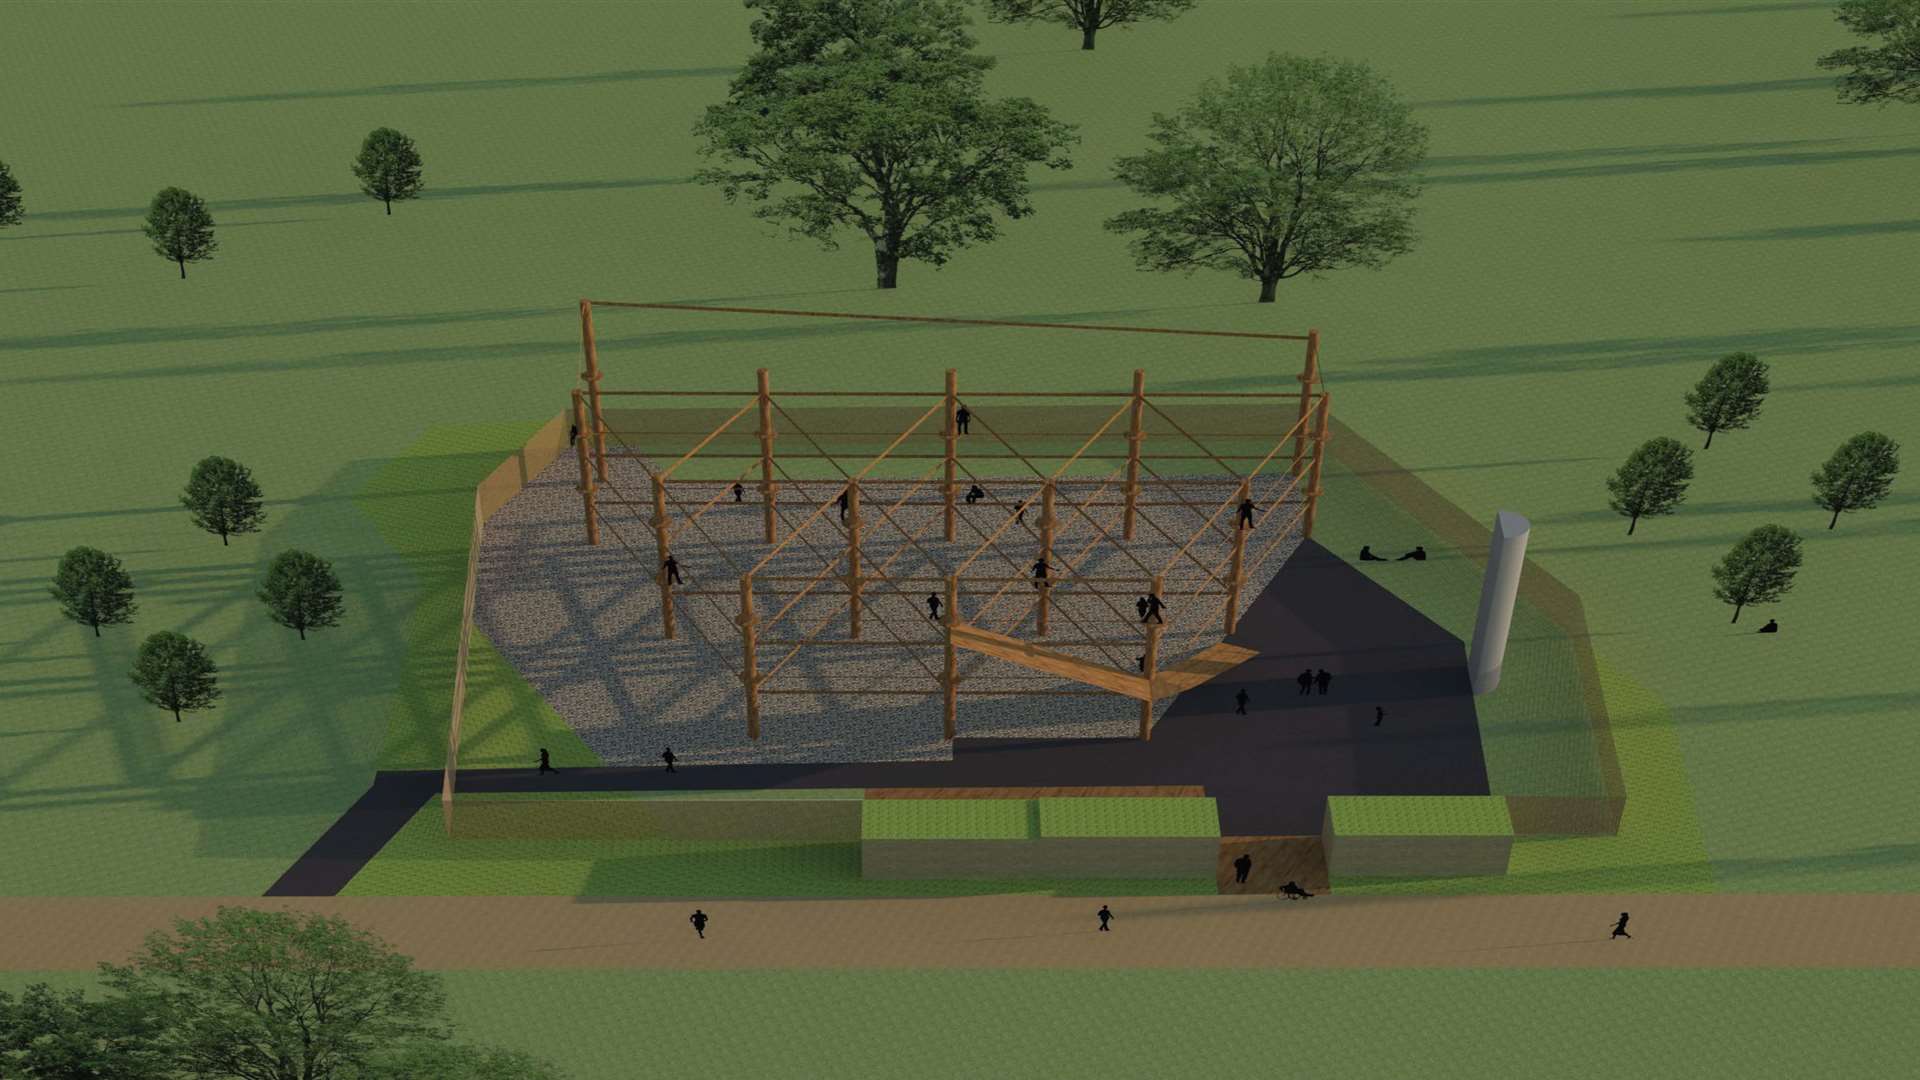 Mote Park will undergo a £4.3million makeover, bringing a high ropes course, adventure golf course and improved facilities.